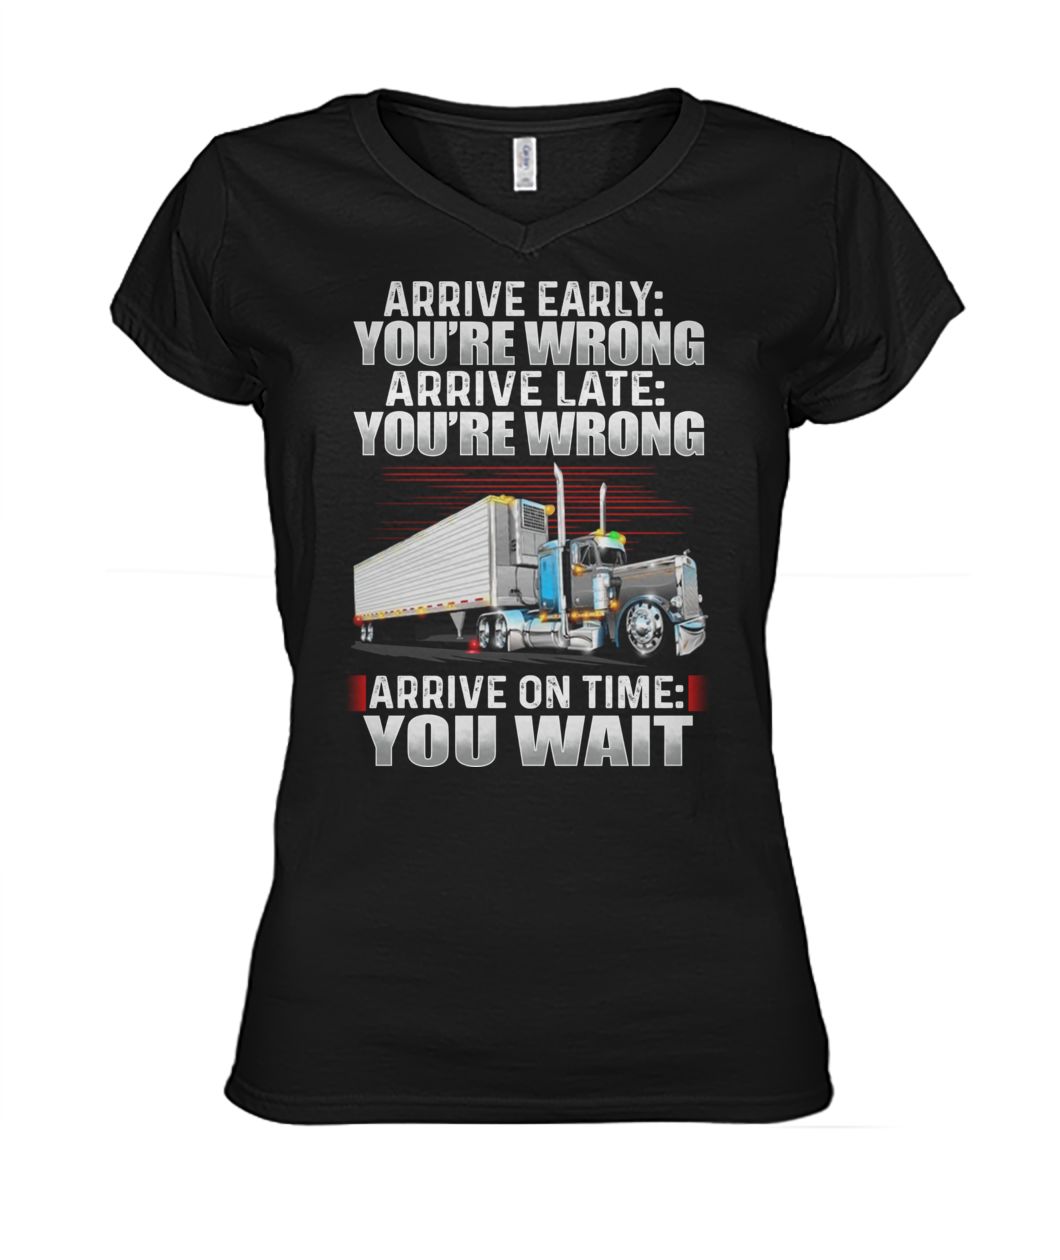 Truck arrive early you re wrong arrive late you're wrong arrive on time you wait women's v-neck